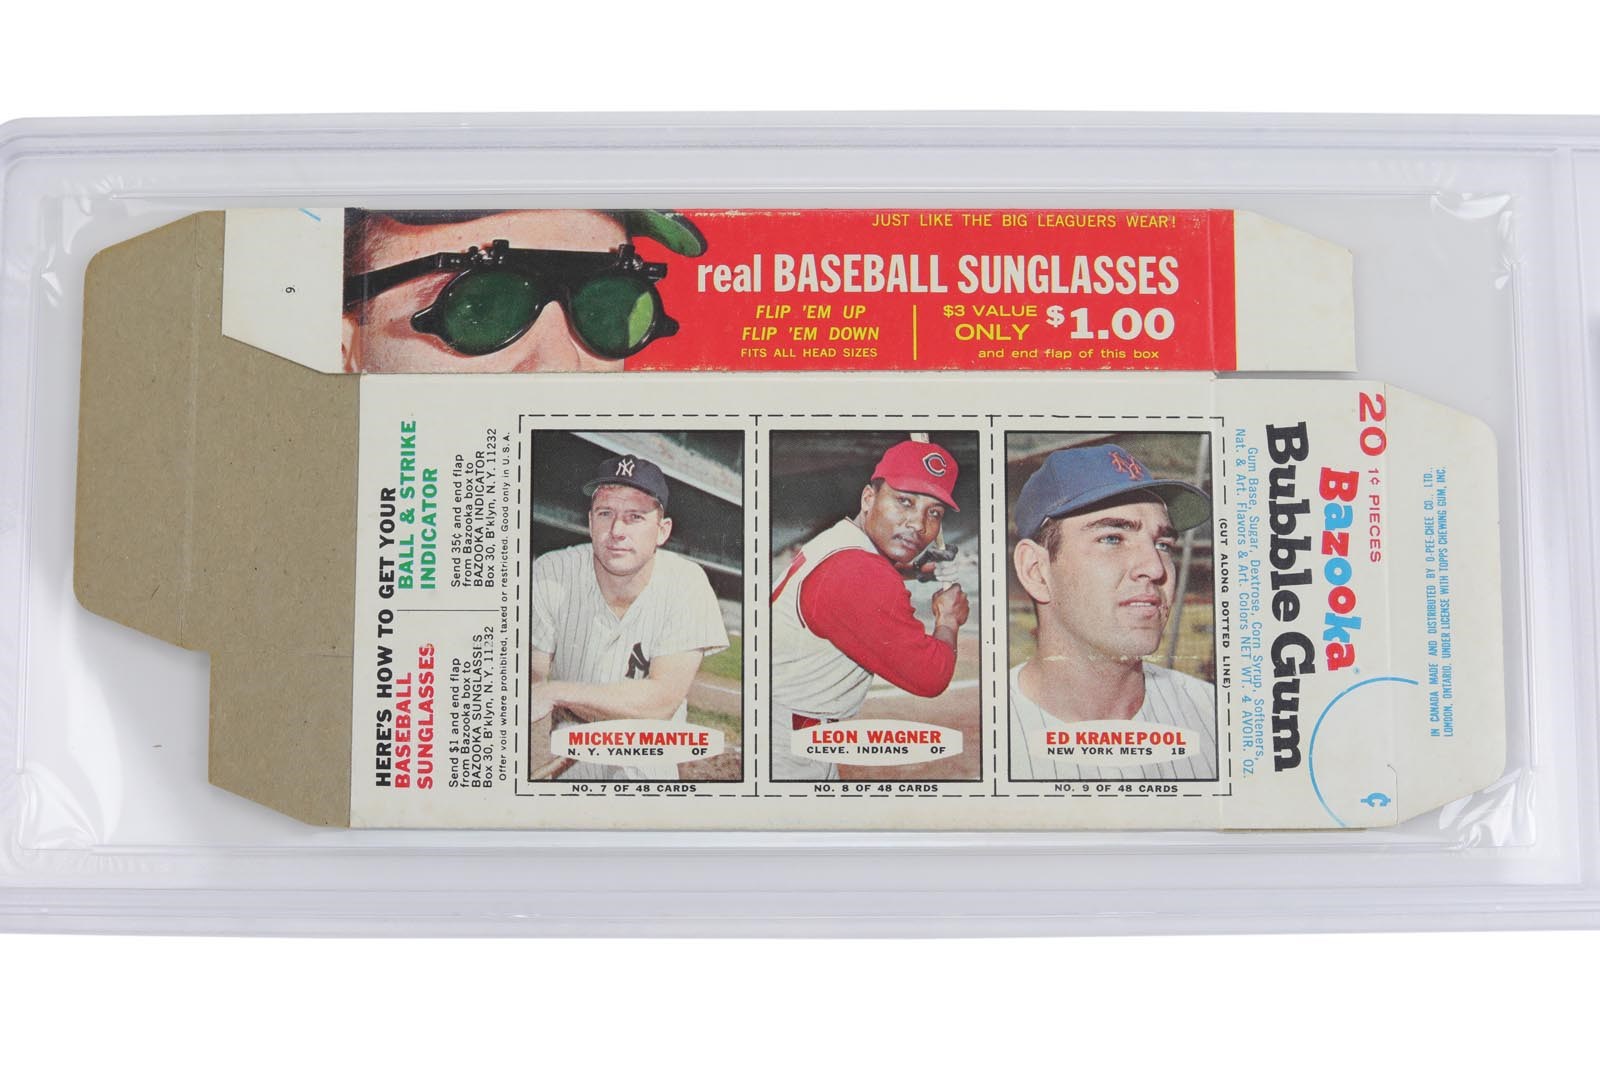 Baseball and Trading Cards - 1966 Bazooka Bubble Gum Complete Box PSA 5 w/ Mantle